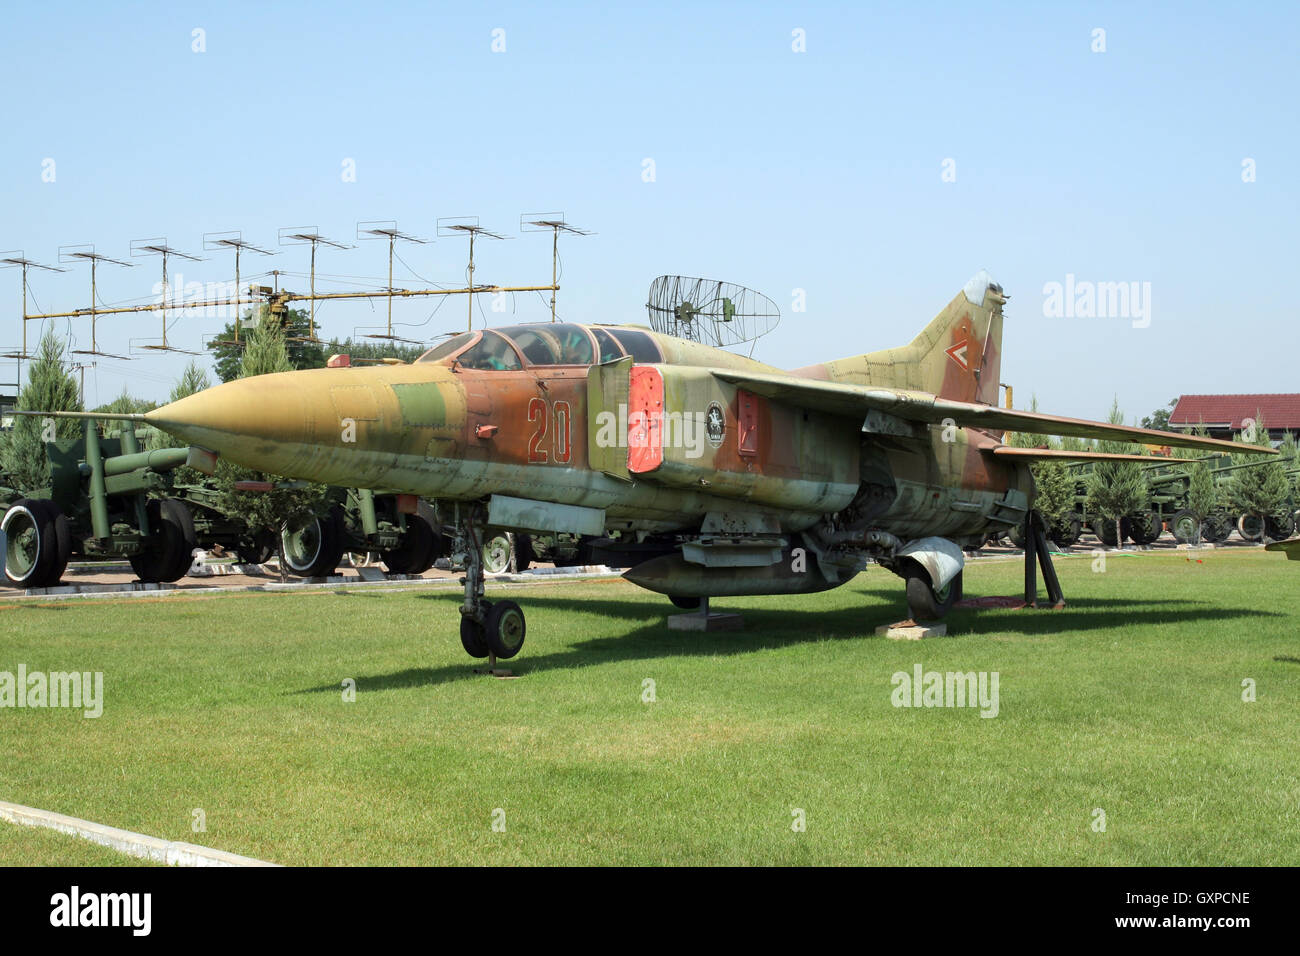 Hungarian Air Force MiG-23 Flogger fighter jet on display in the Military Technology Park, Kecel, Hungary Stock Photo